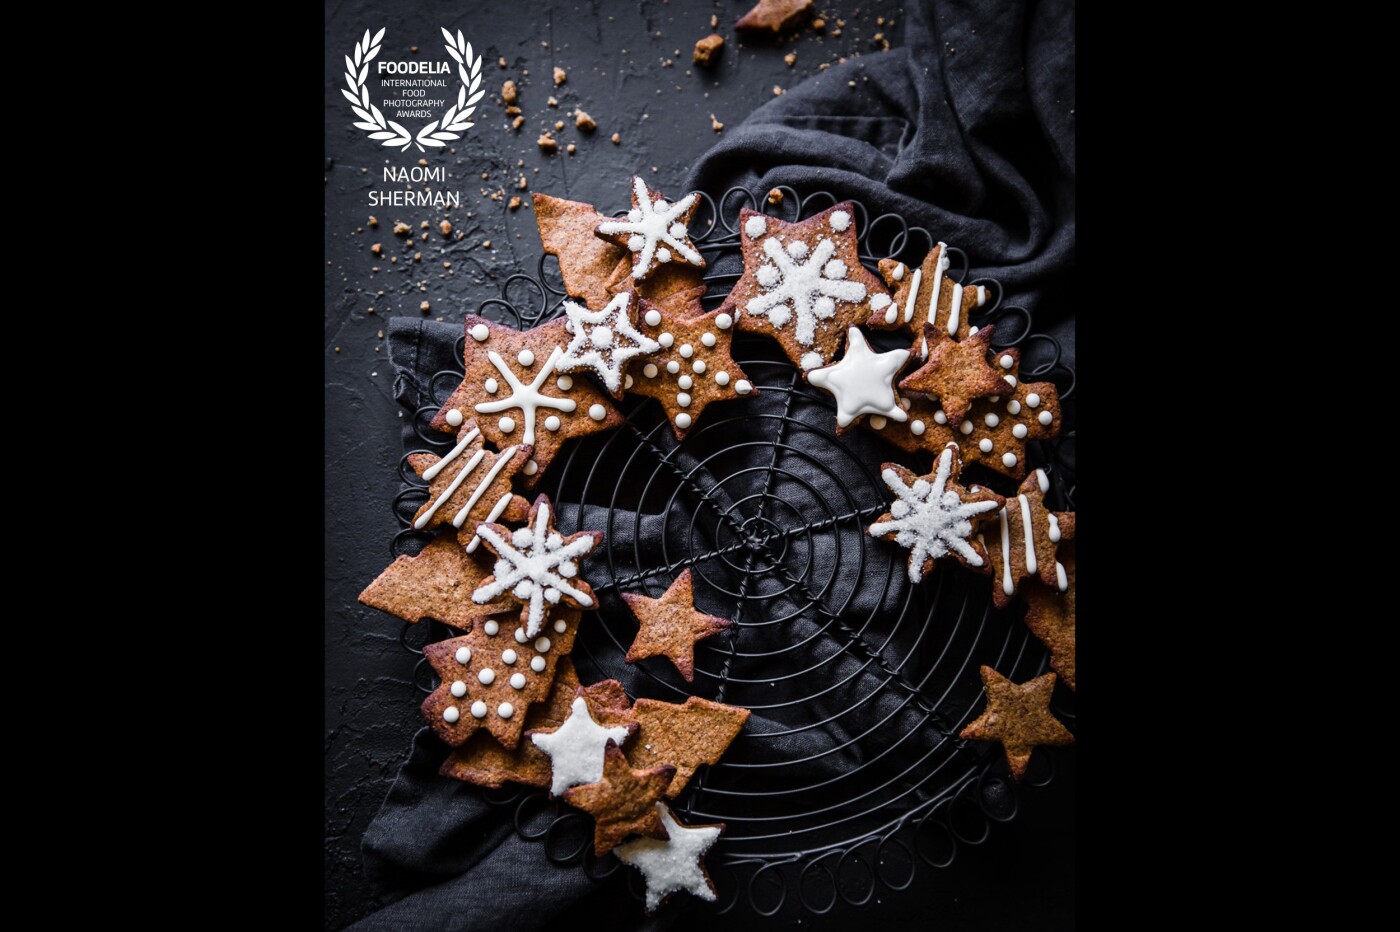 It wouldn't be Christmas with gingerbread or a wreath. How about a gingerbread wreath?<br />
<br />
Shot in my studio, using natural light